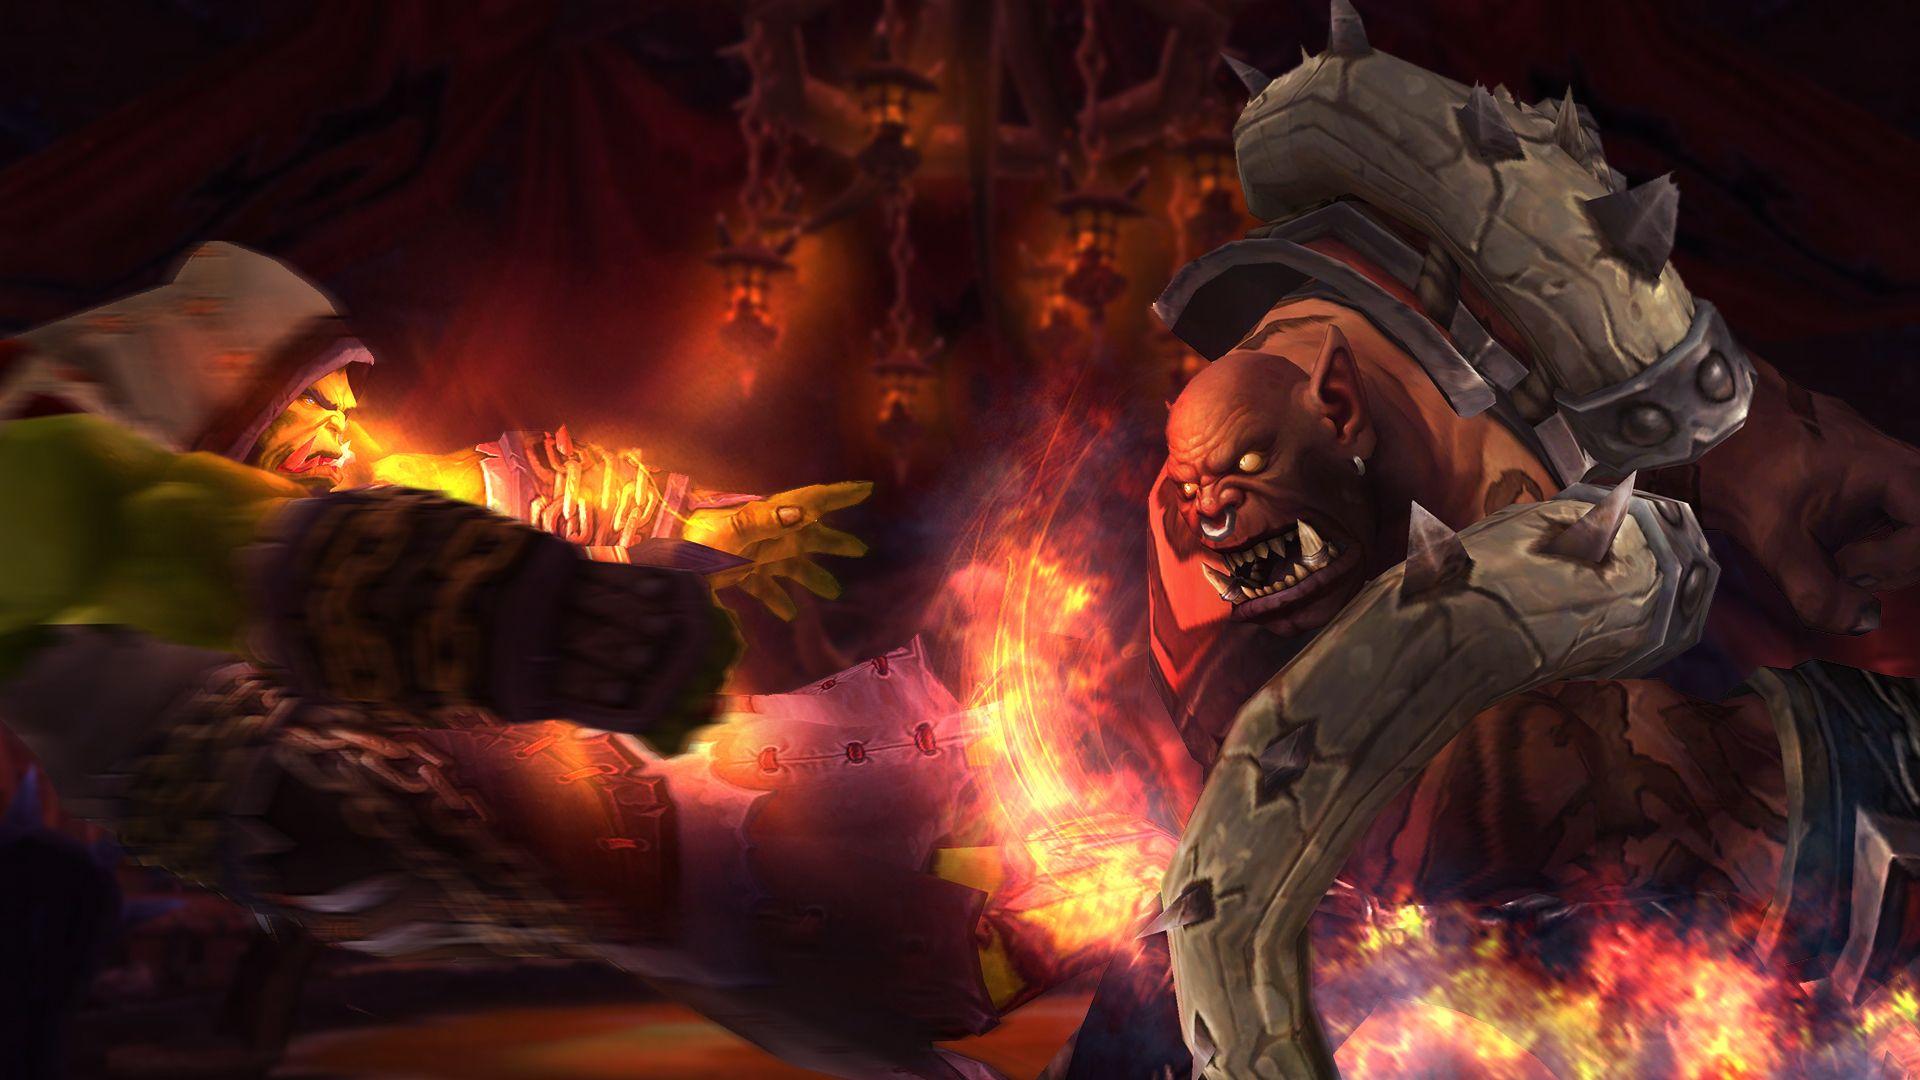 Download wallpaper blow, orcs, wow, world of warcraft, tyrant